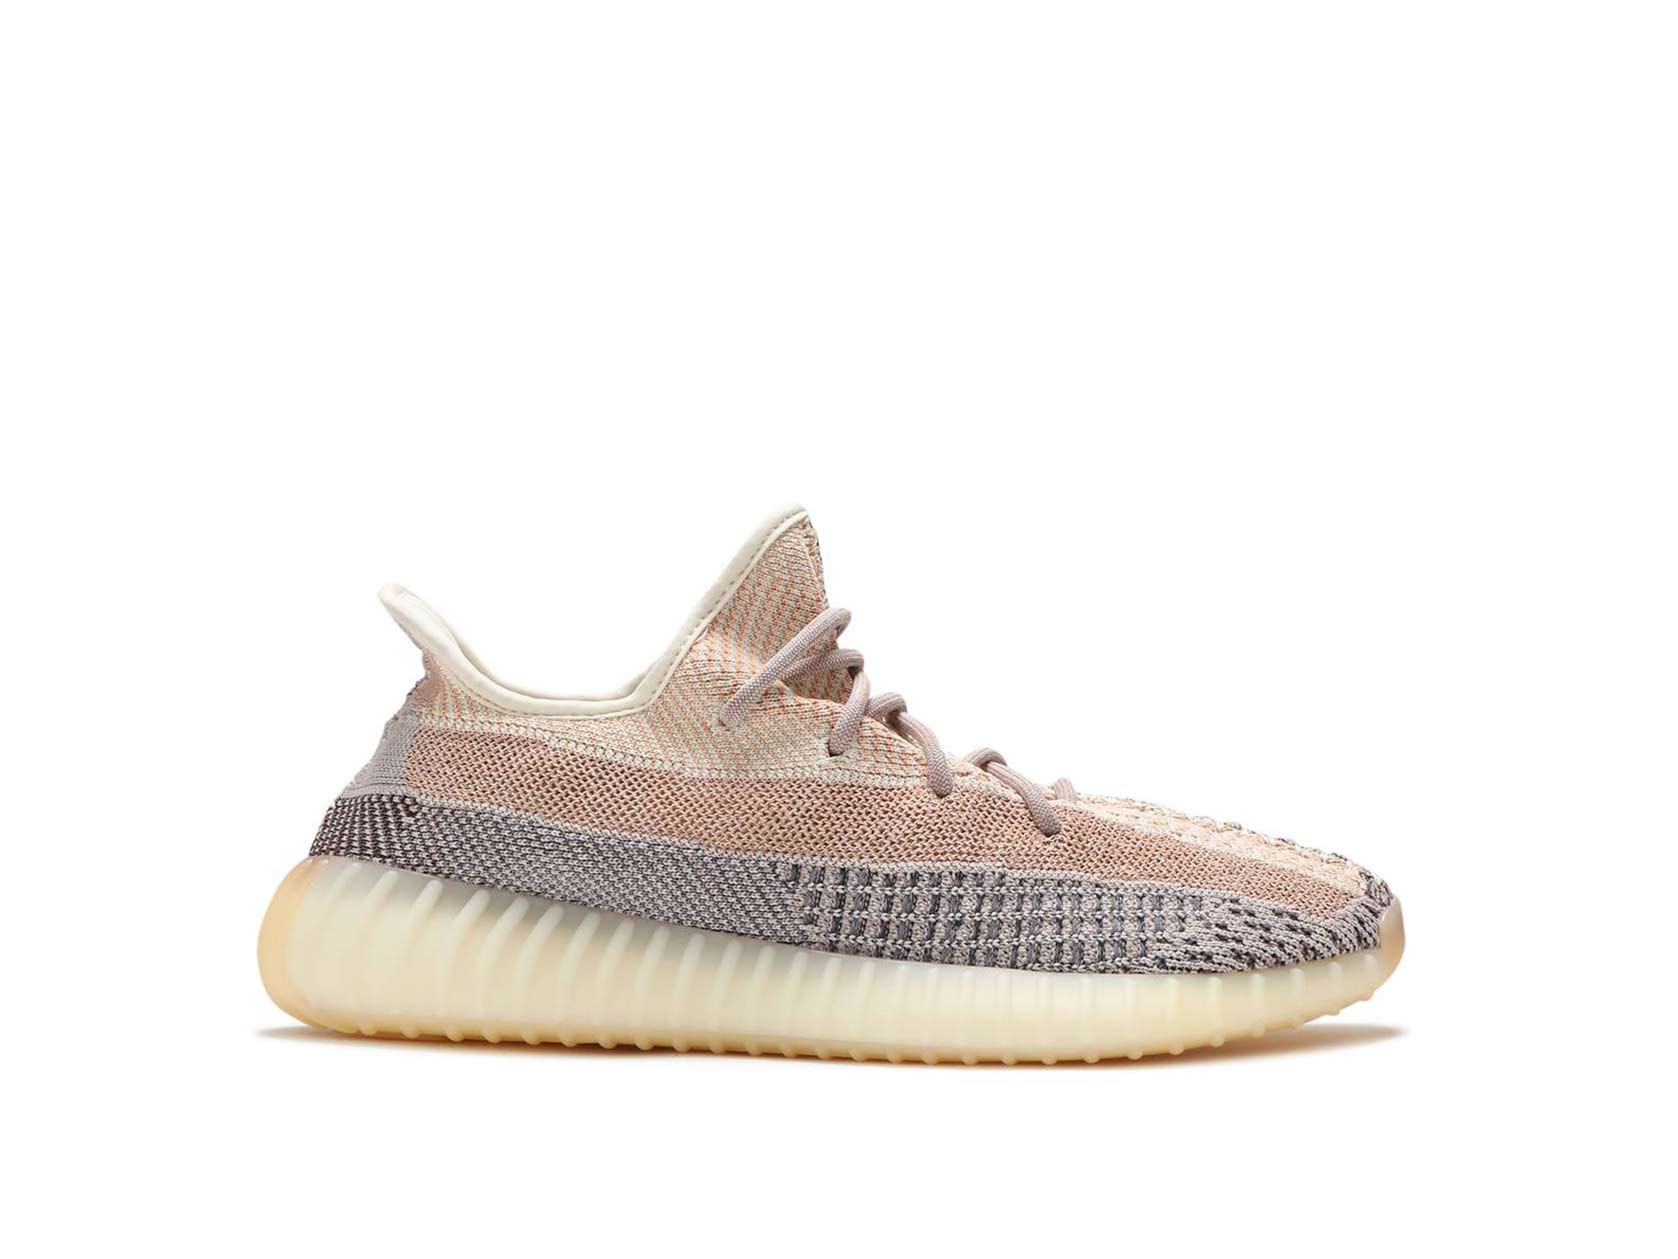 yeezy adidas shoes womens